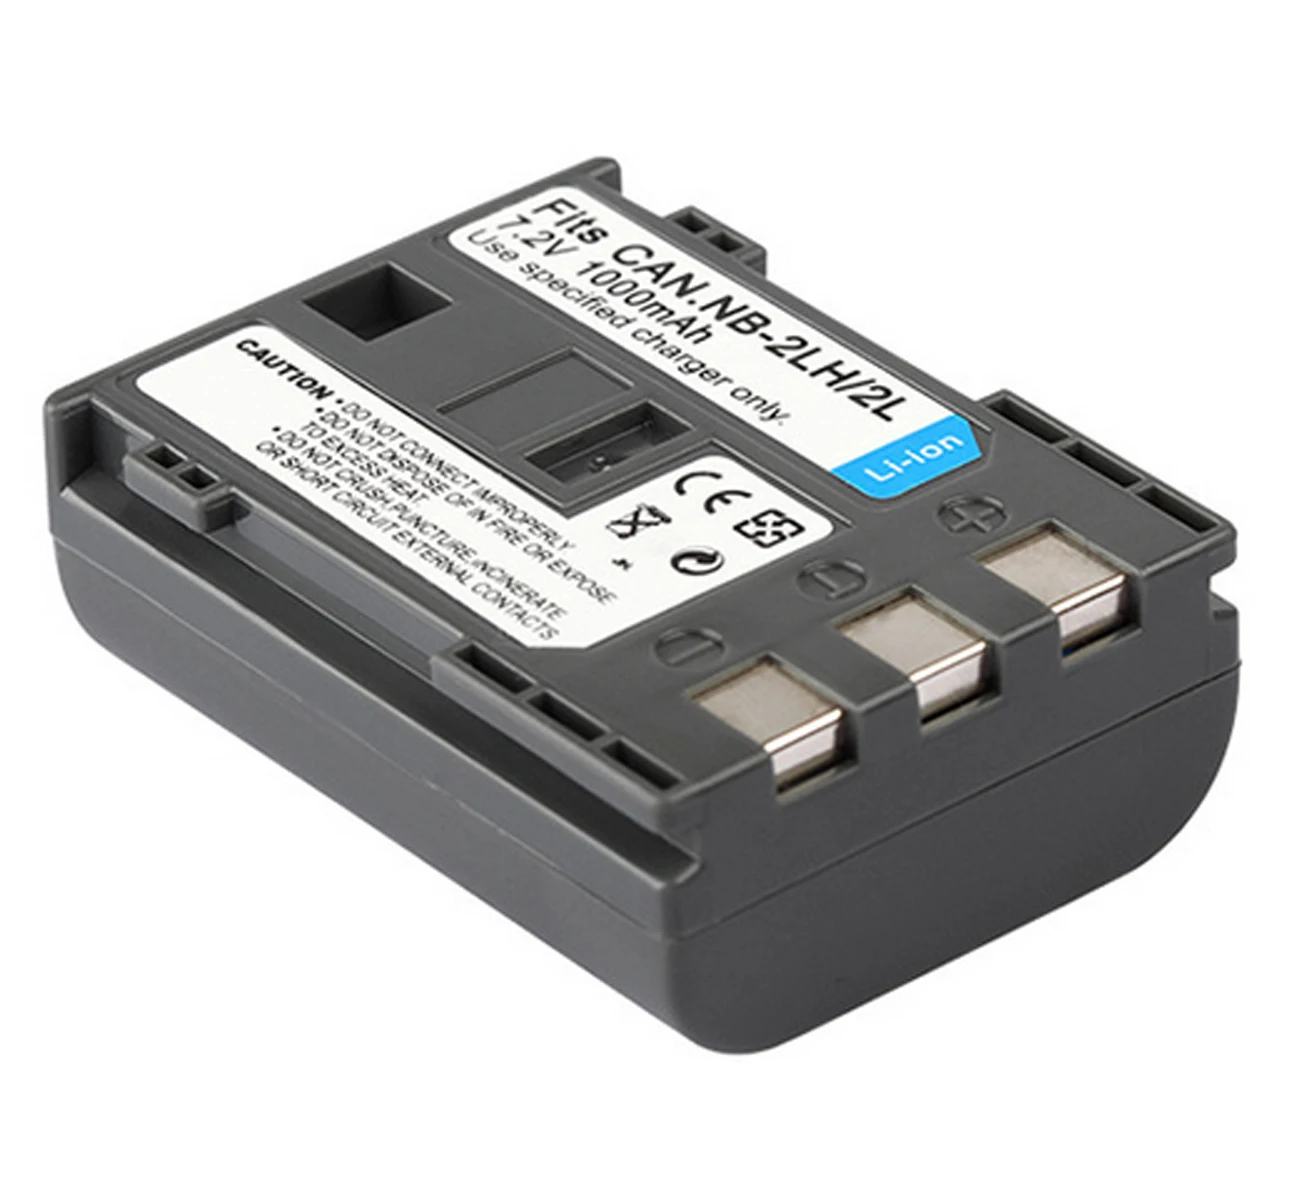 

Rechargeable Lithium-ion Battery Pack For Canon NB-2L, NB2L, NB-2LH, NB2LH, NB-2L5, NB2L5, NB-2L12, NB-2L13, NB-2L14, BP-2L14